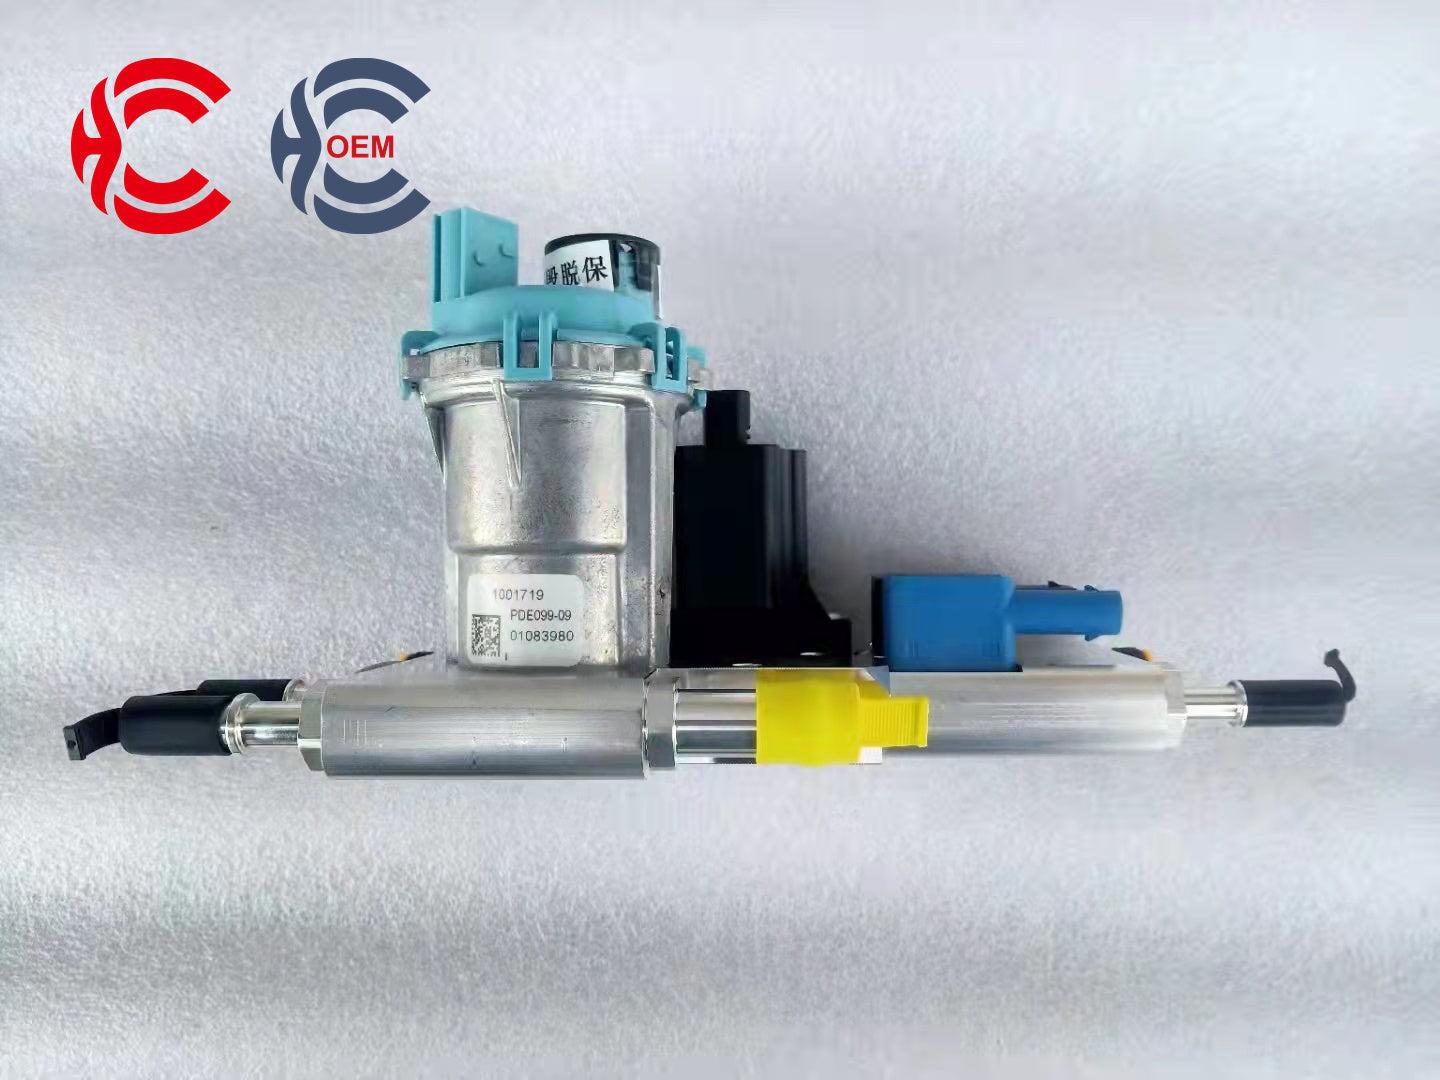 OEM: 1205710-T69L0 DINEX AIBONAIRMaterial: ABS metalColor: black silverOrigin: Made in ChinaWeight: 1000gPacking List: 1* Adblue Pump More ServiceWe can provide OEM Manufacturing serviceWe can Be your one-step solution for Auto PartsWe can provide technical scheme for you Feel Free to Contact Us, We will get back to you as soon as possible.